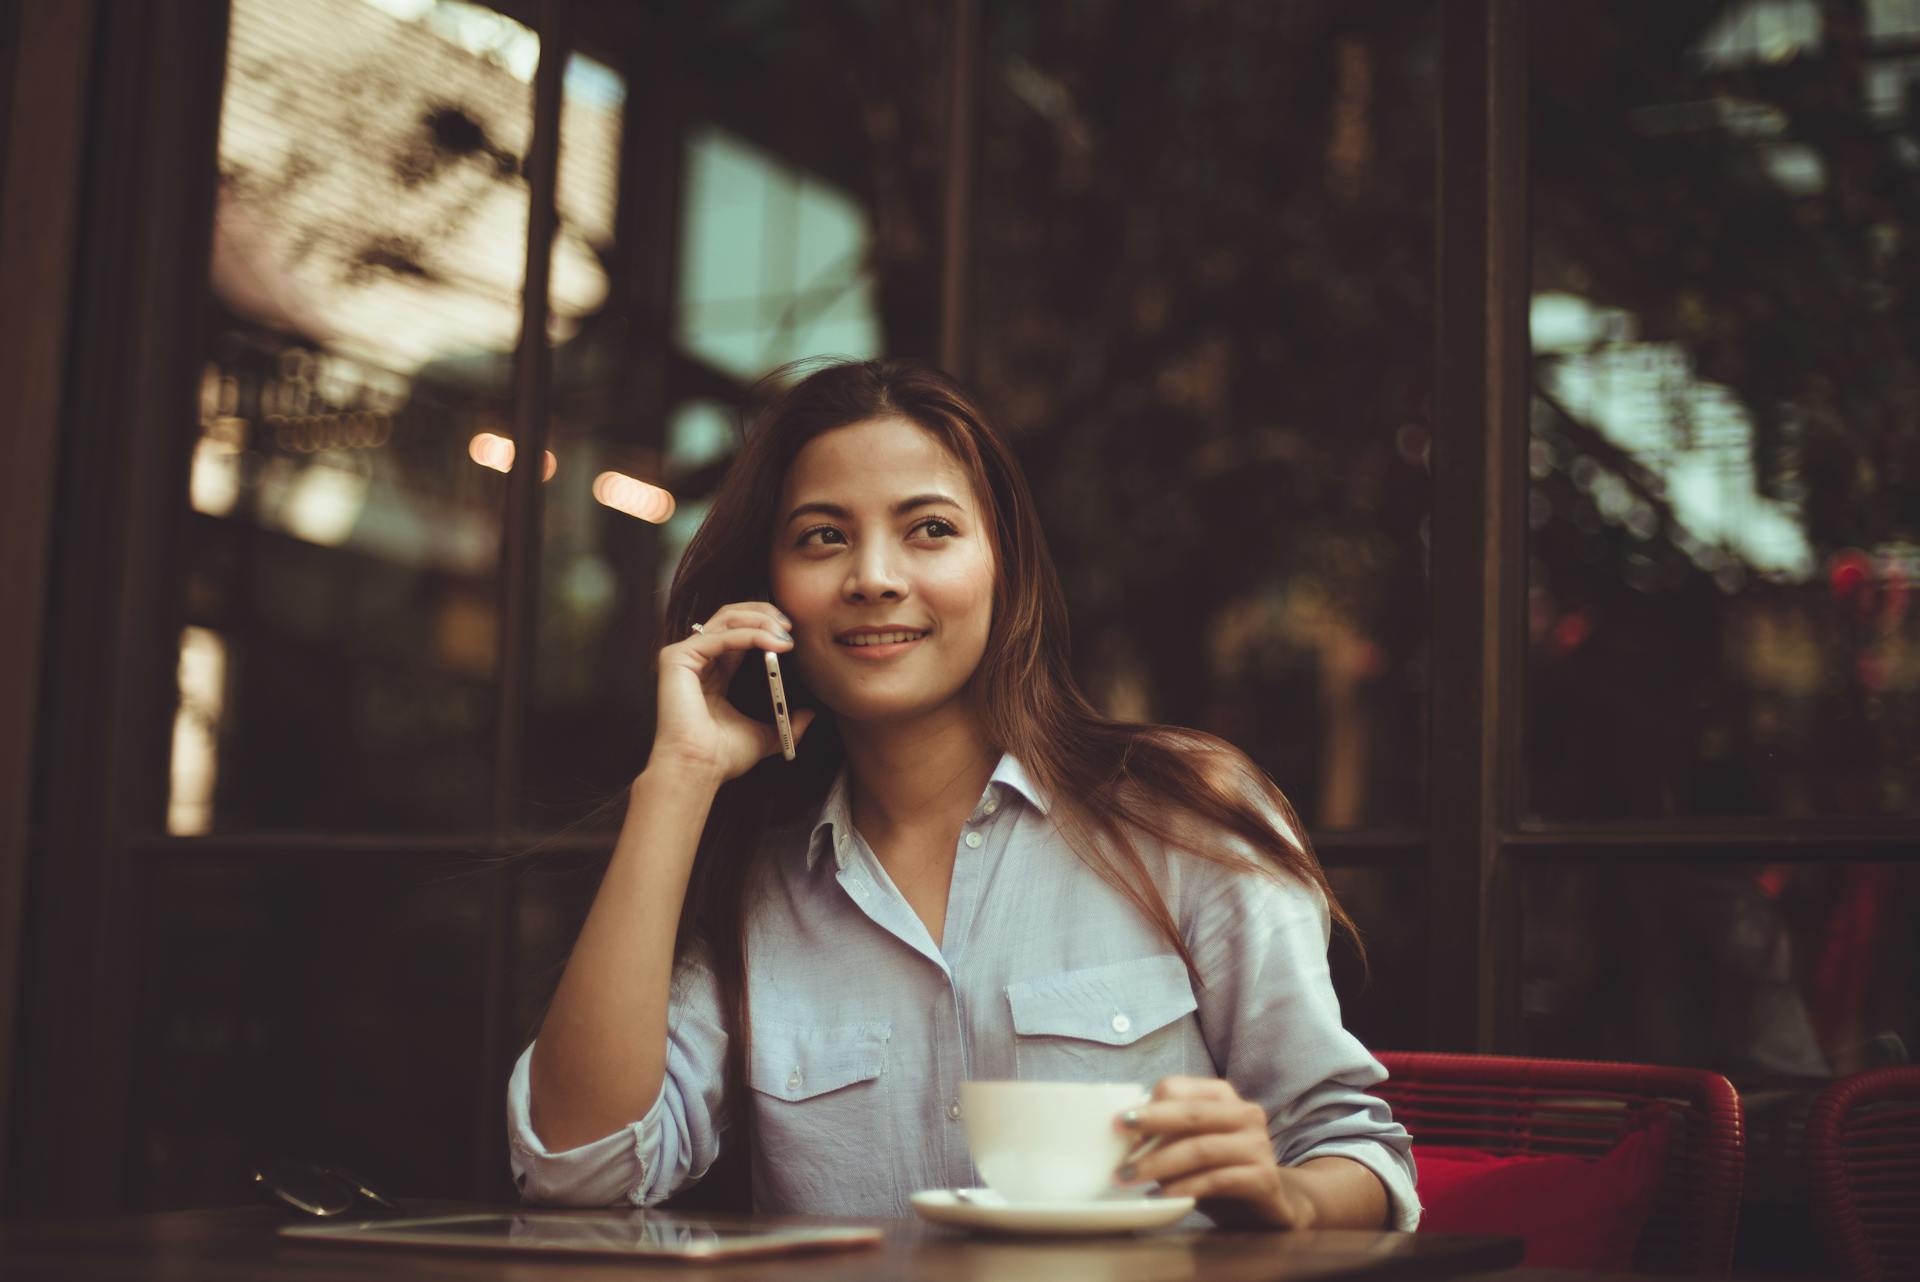 A person talking on the phone | Source: Pexels